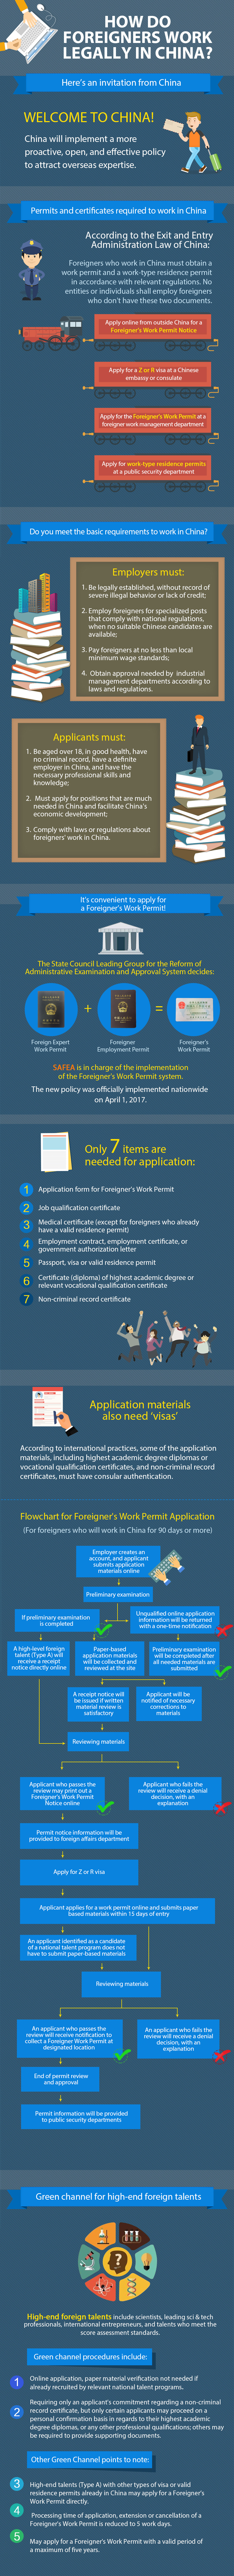 How do foreigners work legally in China?